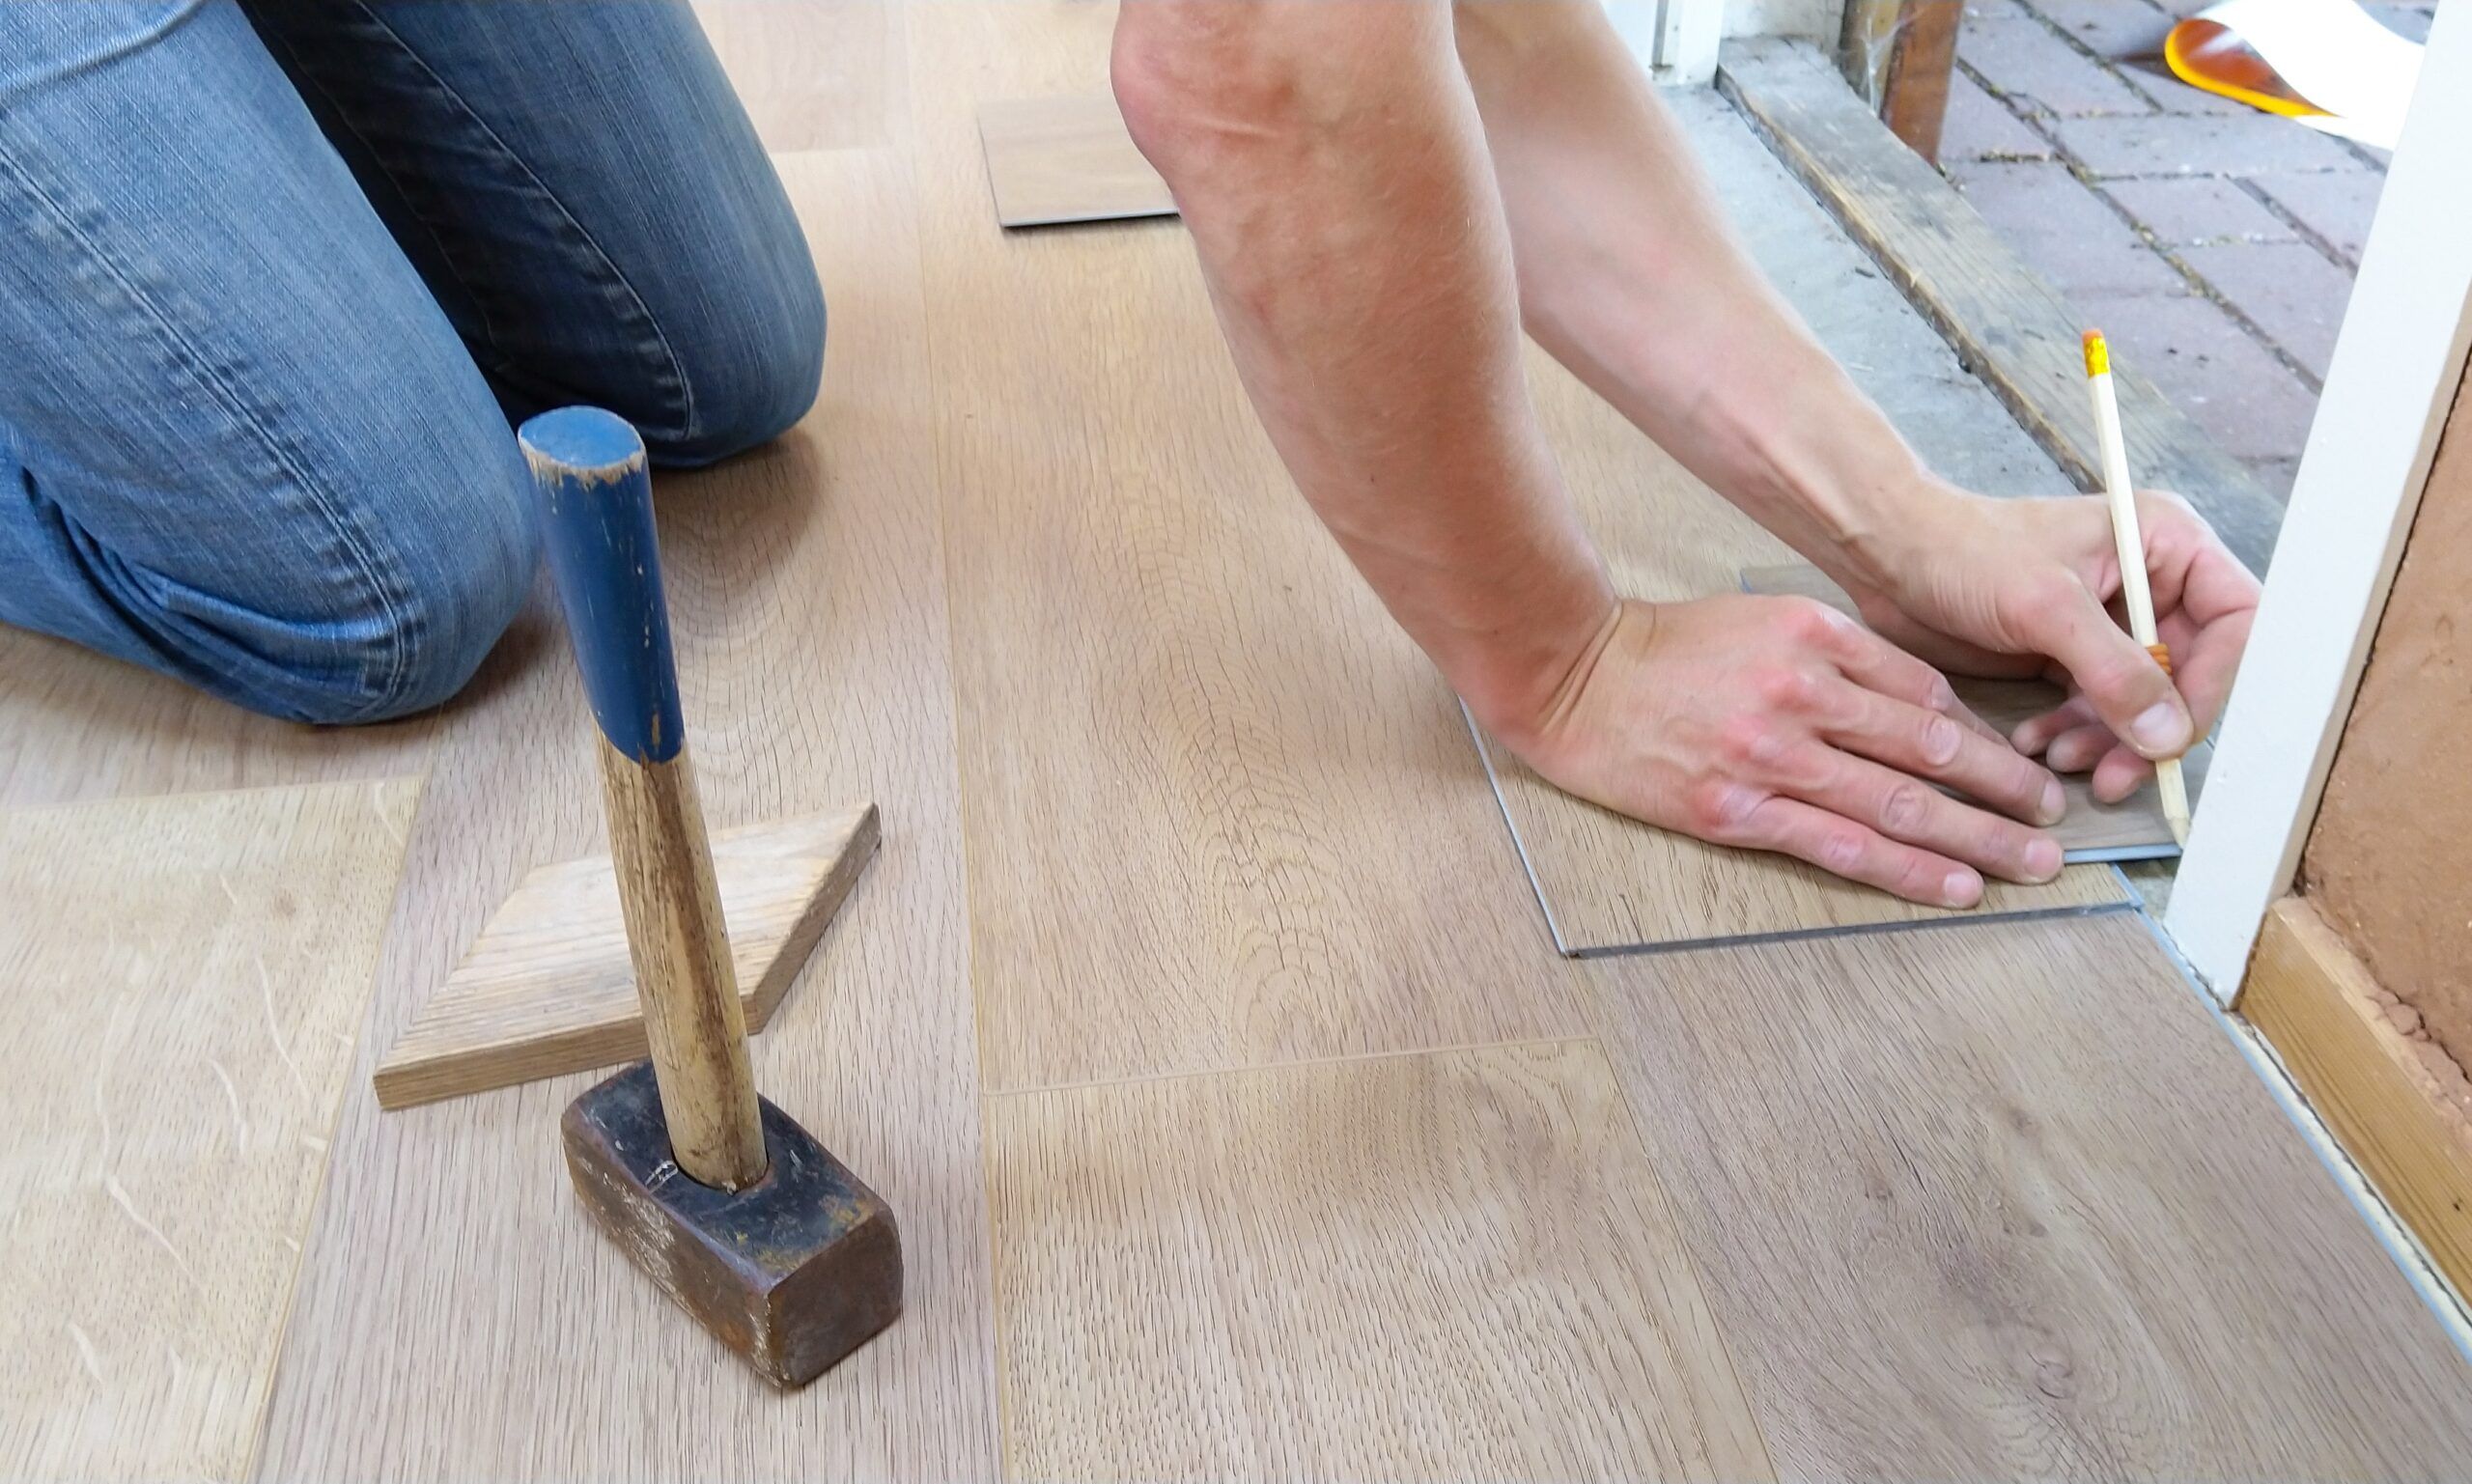 Replacing Carpet With Hardwood Flooring: Better for Resale Value?